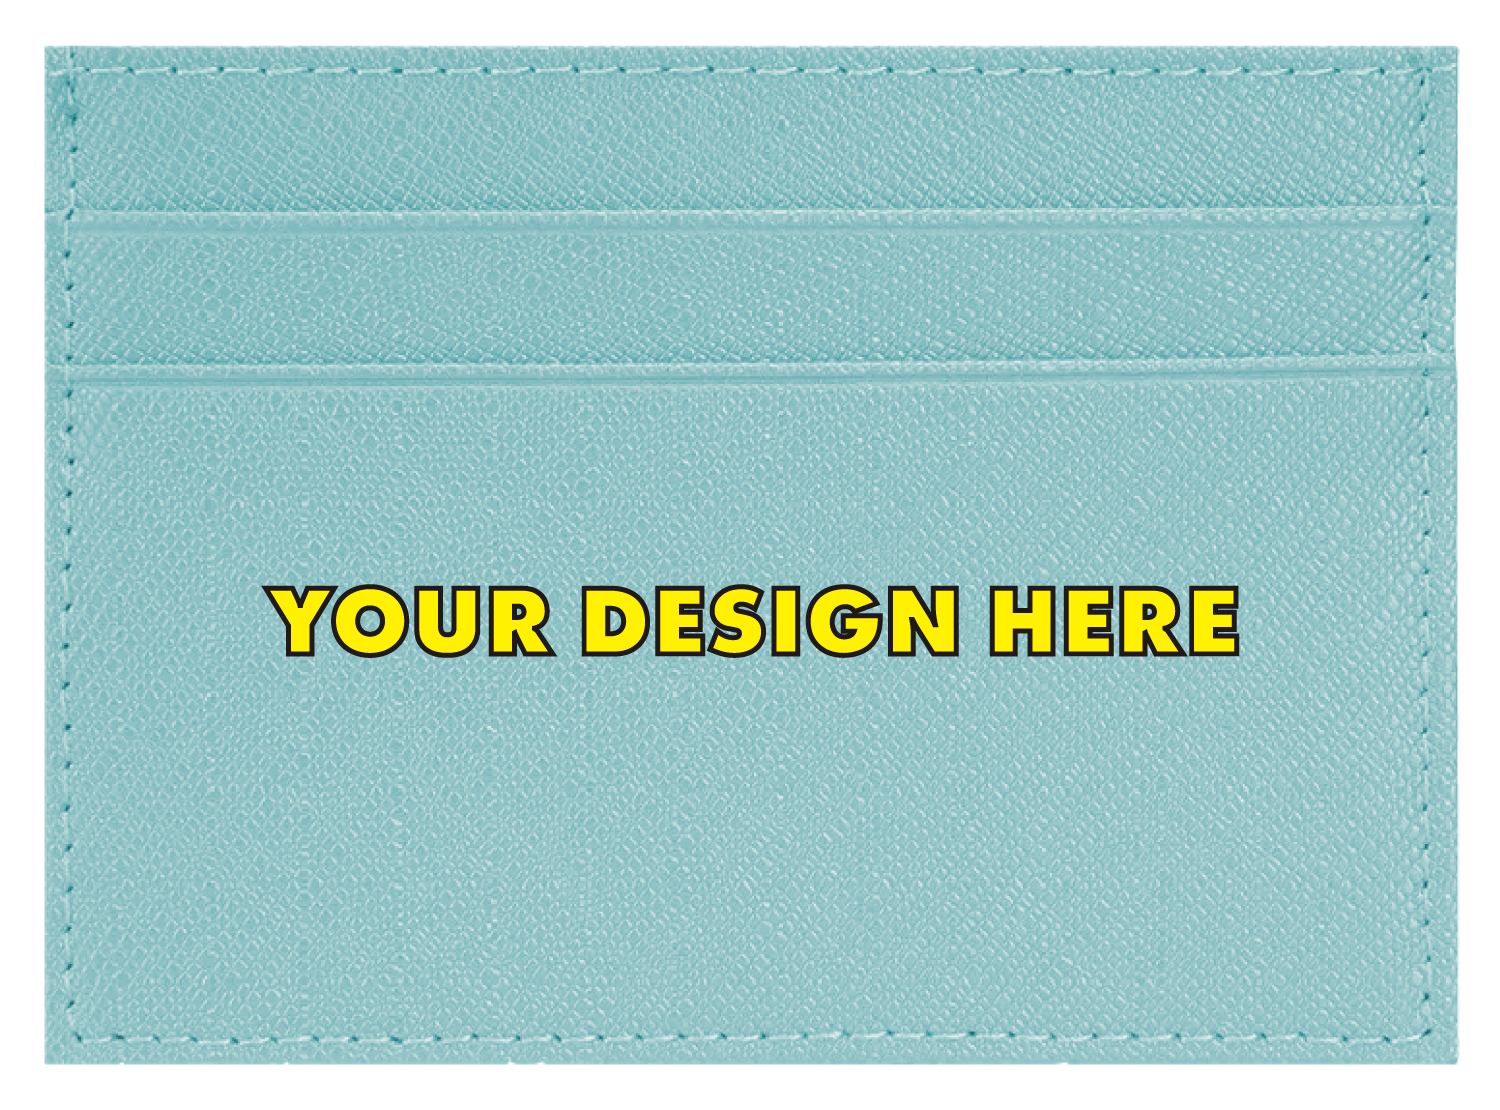 Create Your Own - Leather Wallet (Teal)